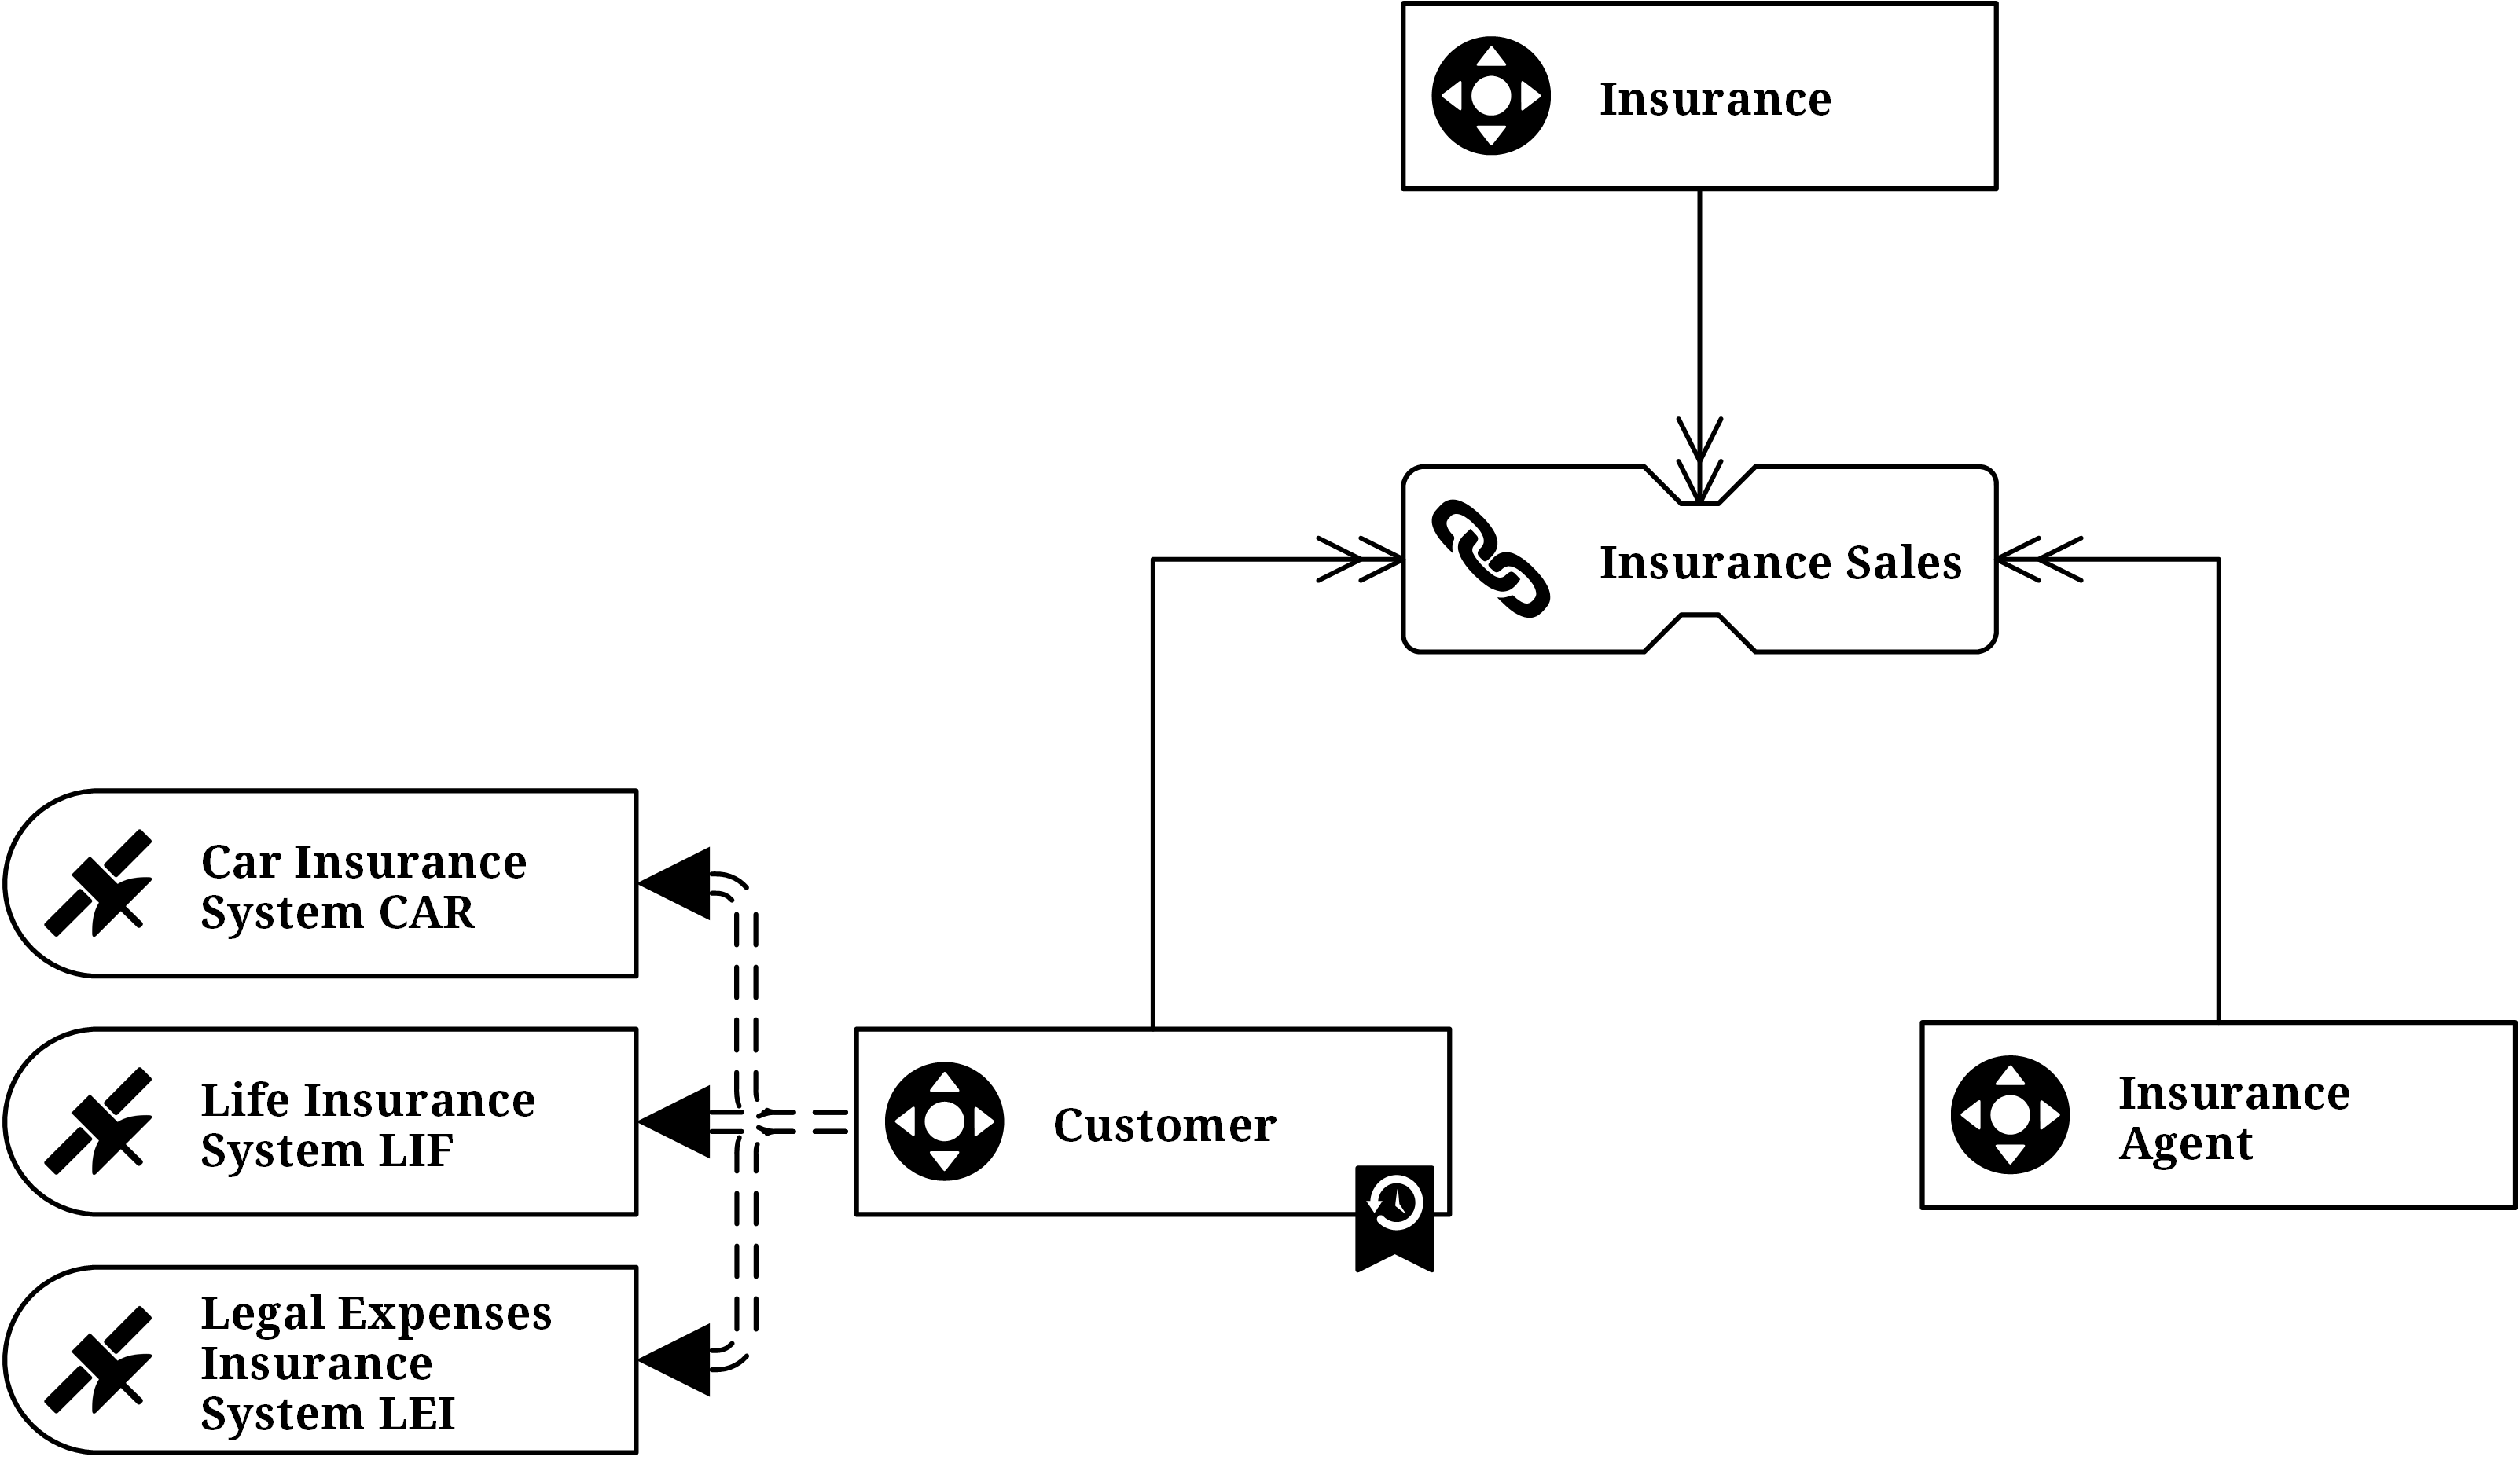 How to use Point in Time Tables (PIT) in the Insurance Industry?